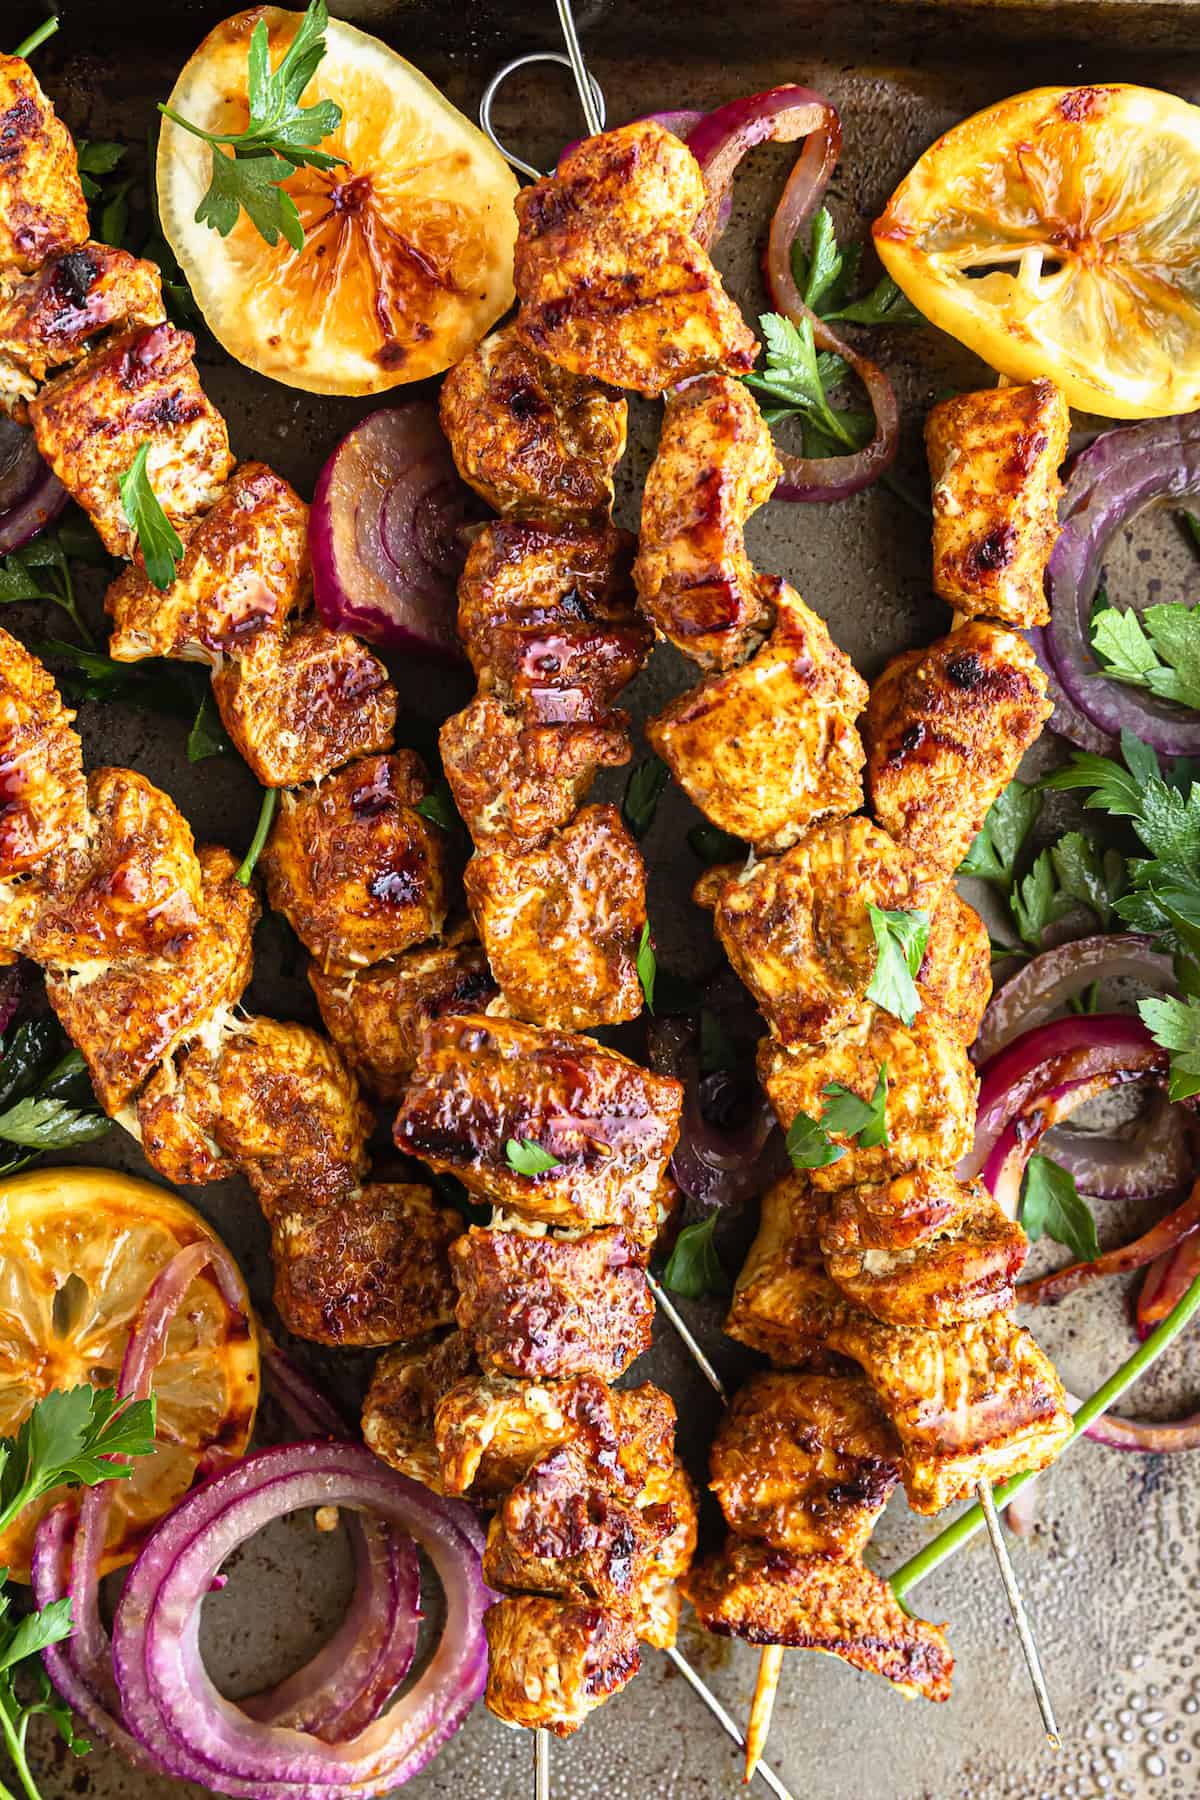 Five Shawarma Grilled Chicken Skewers on a Metal Pan with Onions, Lemon Slices and More